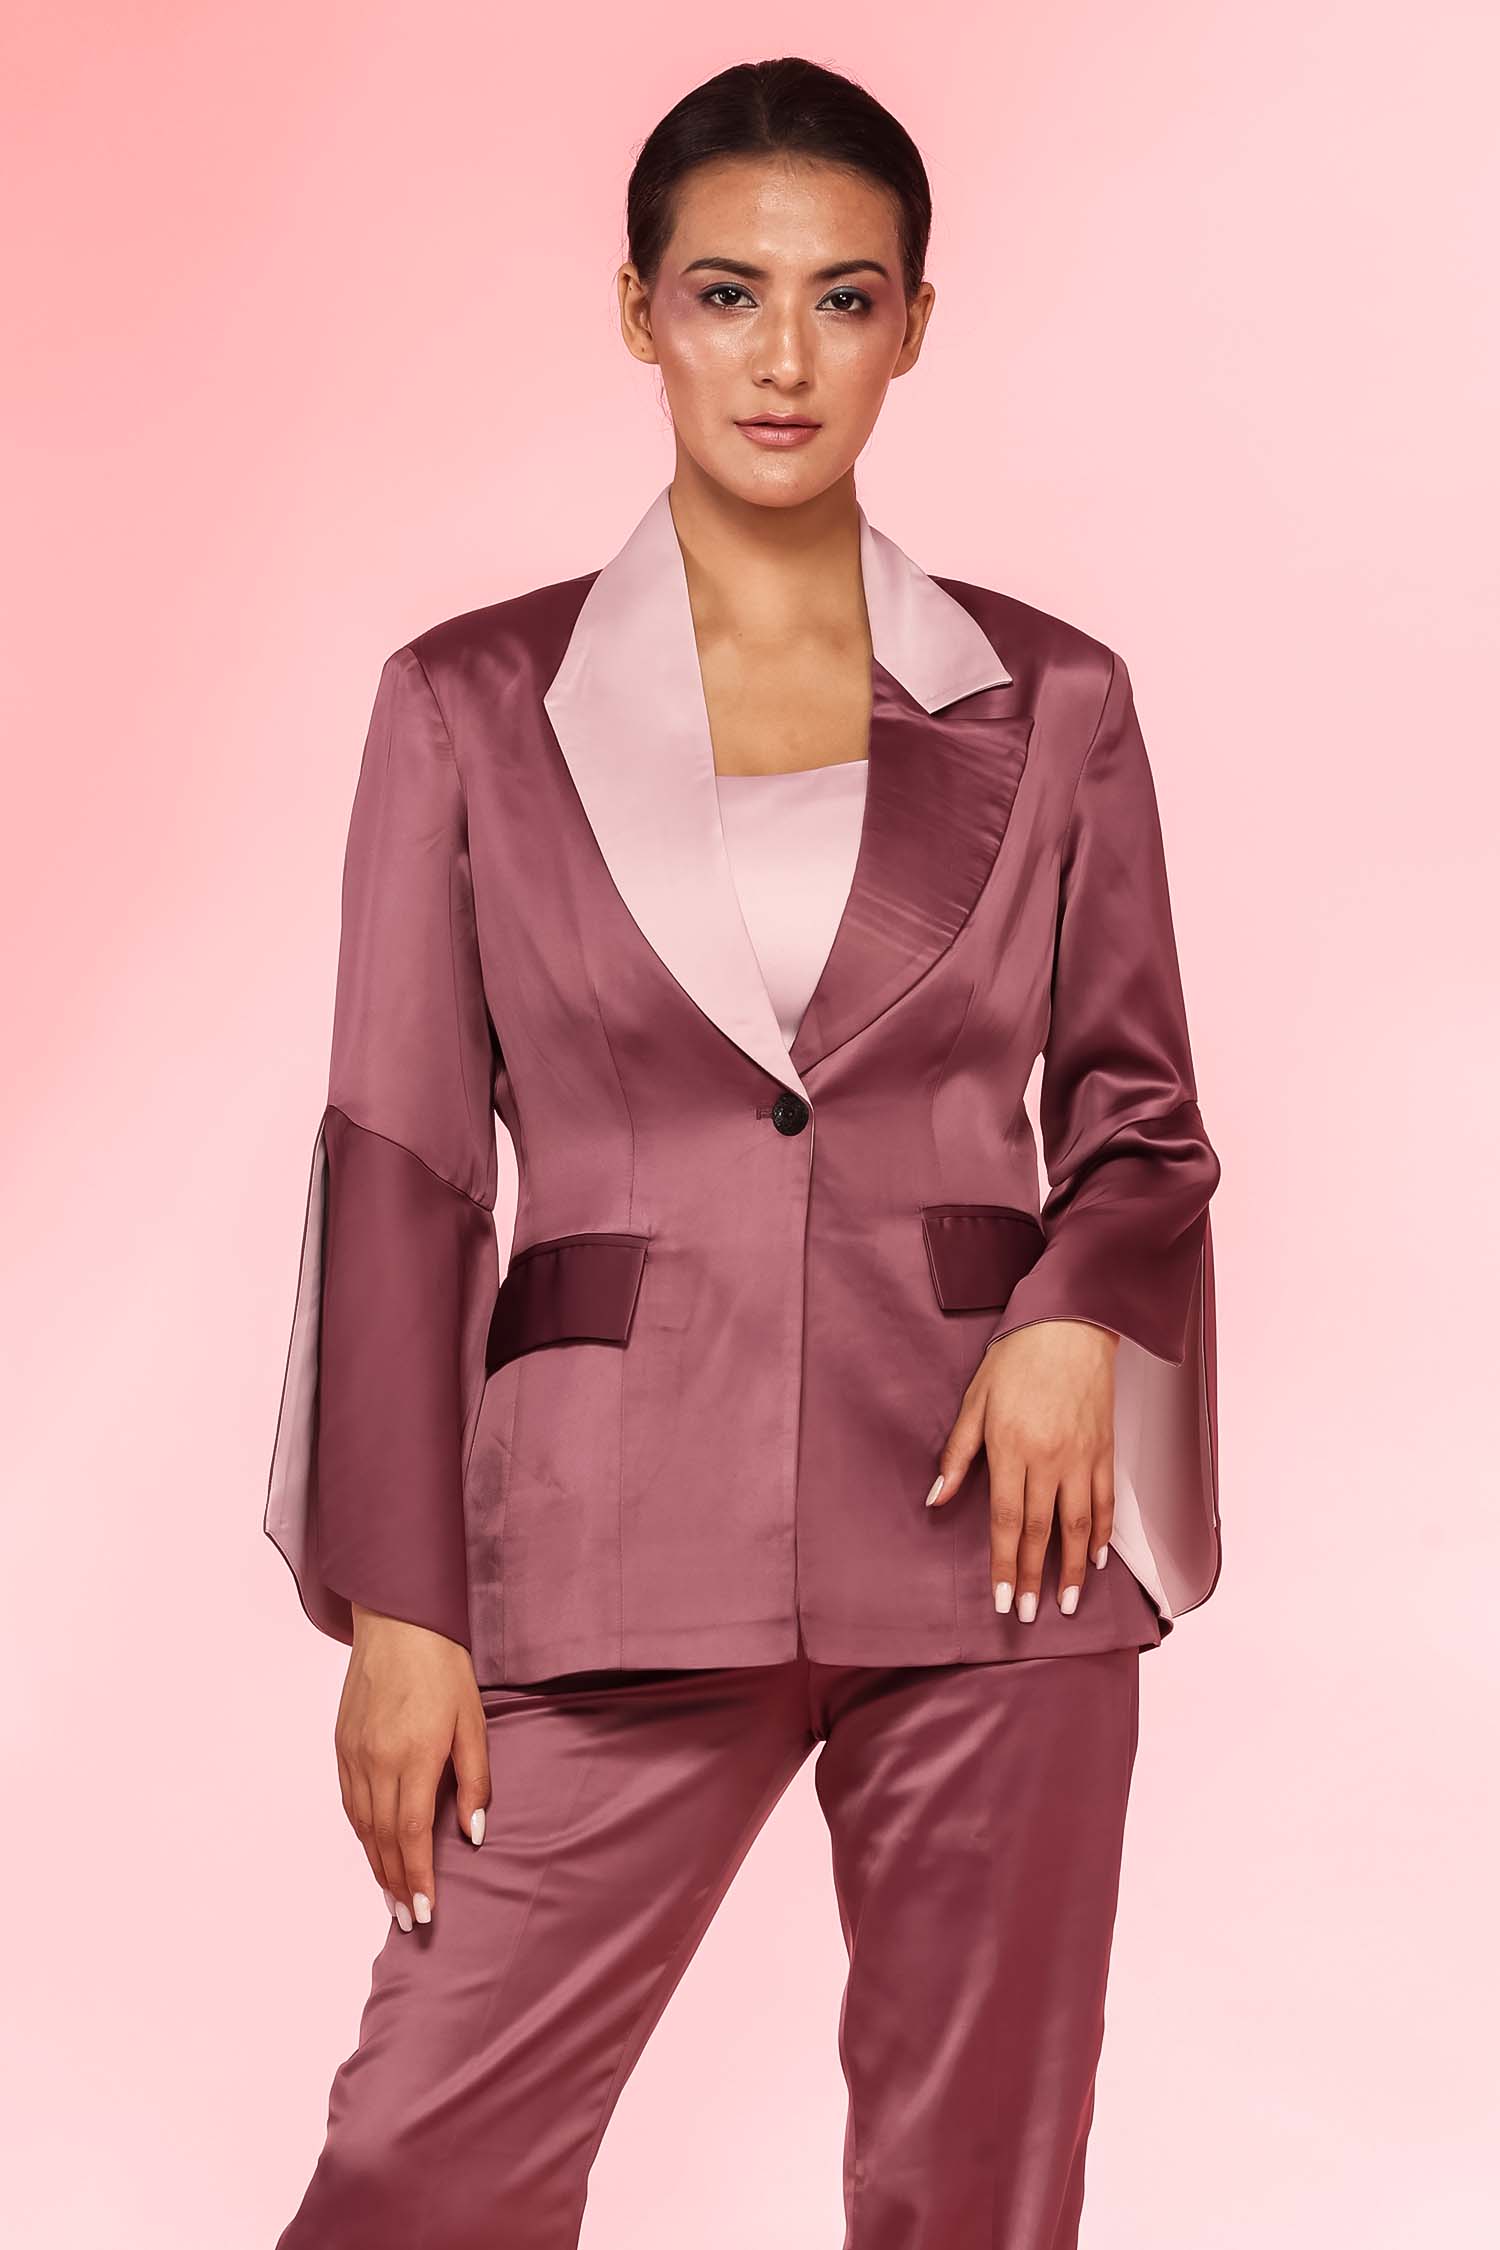 Twilight Bubble Gum Cape Sleeved Blazer with Crop Top and Flared Pants